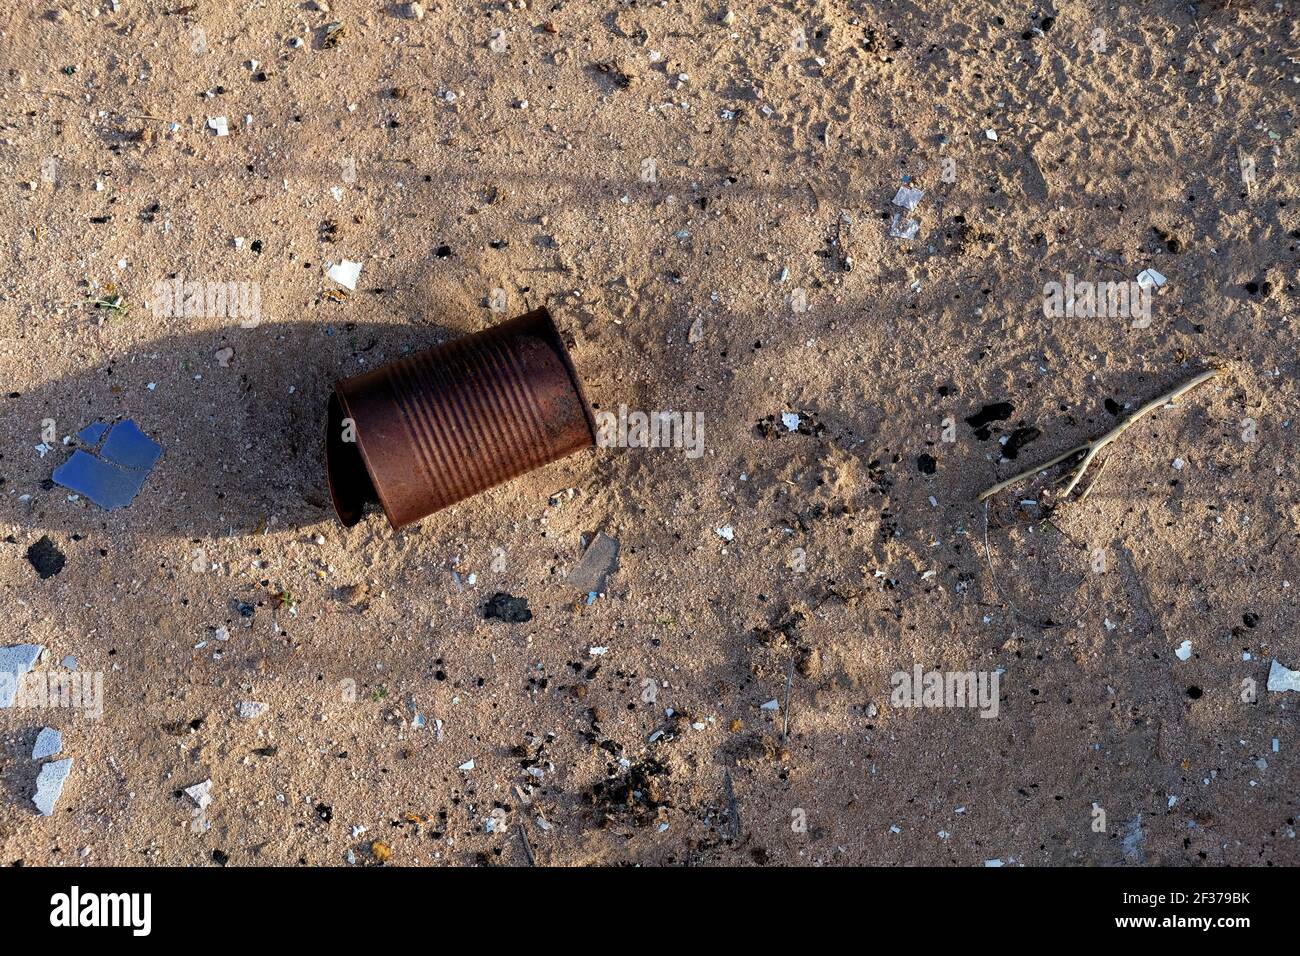 Corroded tin can on the ground; ravages of time on modern civilization; rust and aging; effects of metal exposed to oxygen and moisture over time. Stock Photo